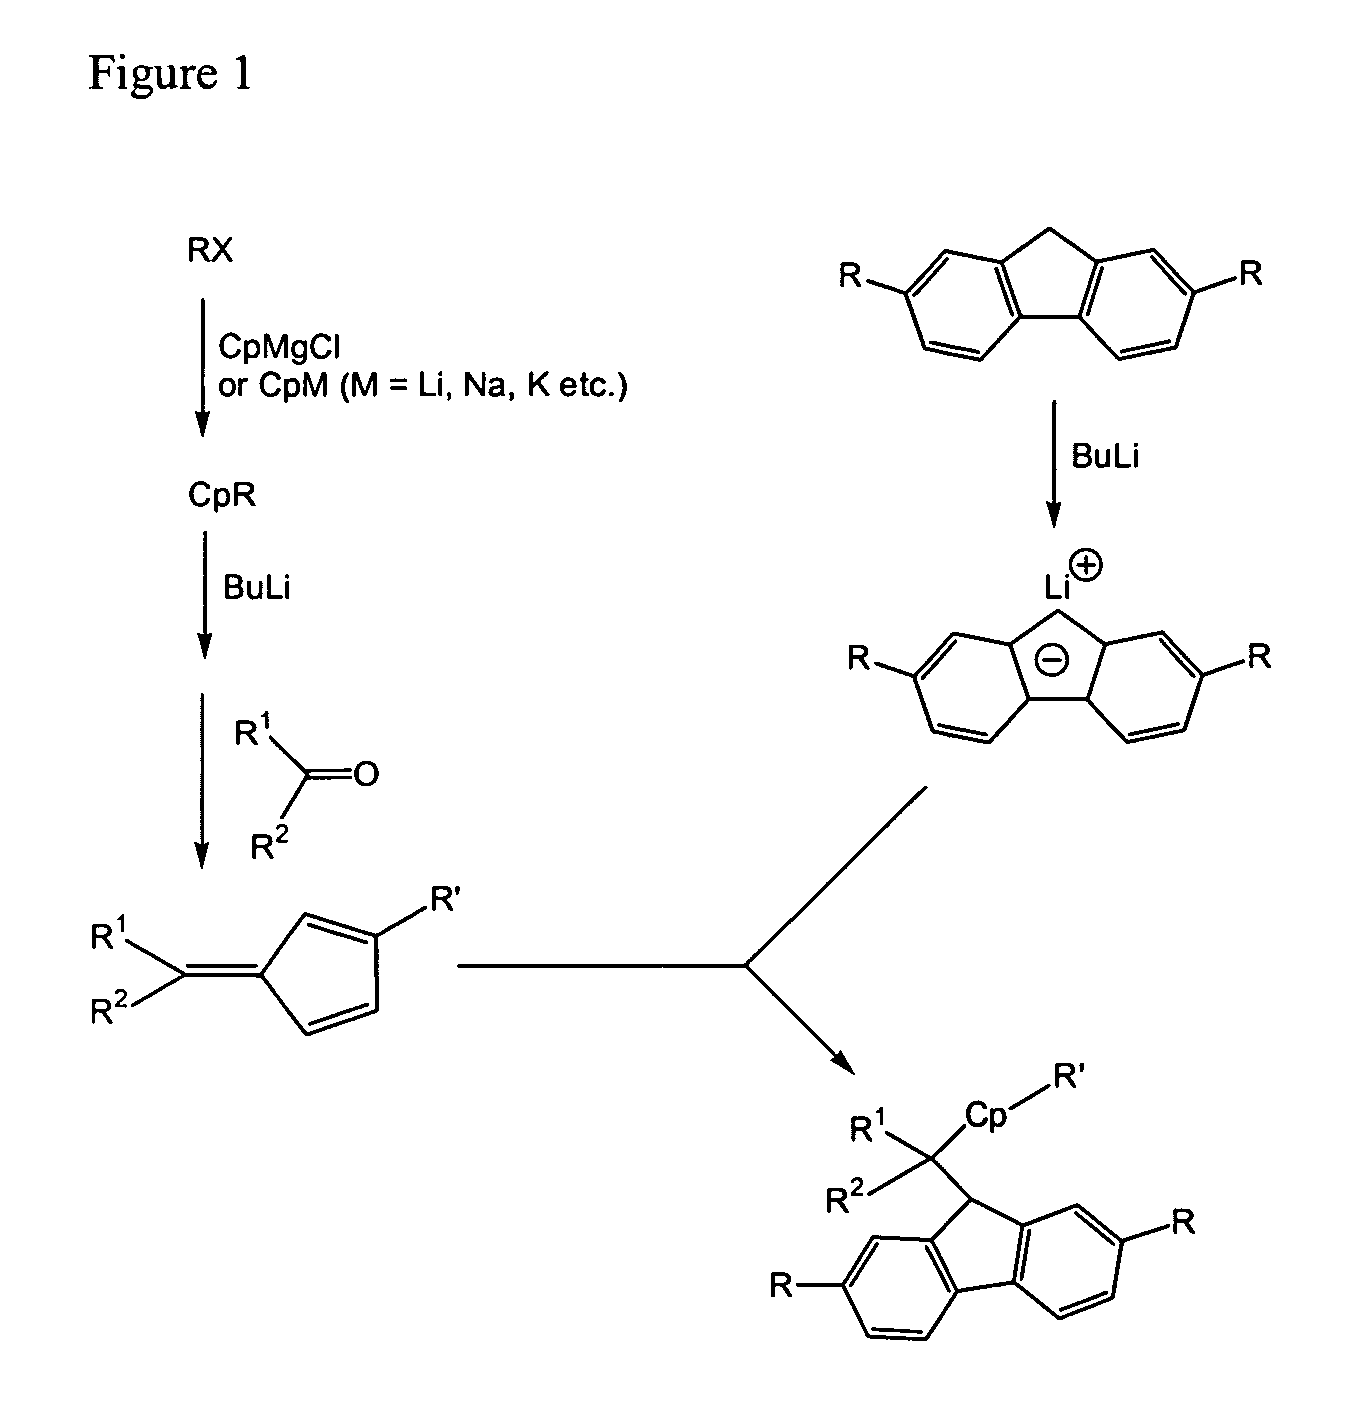 Process for one-pot synthesis of 1,1-diphenyl-1-(3-substituted-cyclopentadienyl)-1-(2,7-di-t-butyl-fluoren-9-yl)methane type ligands